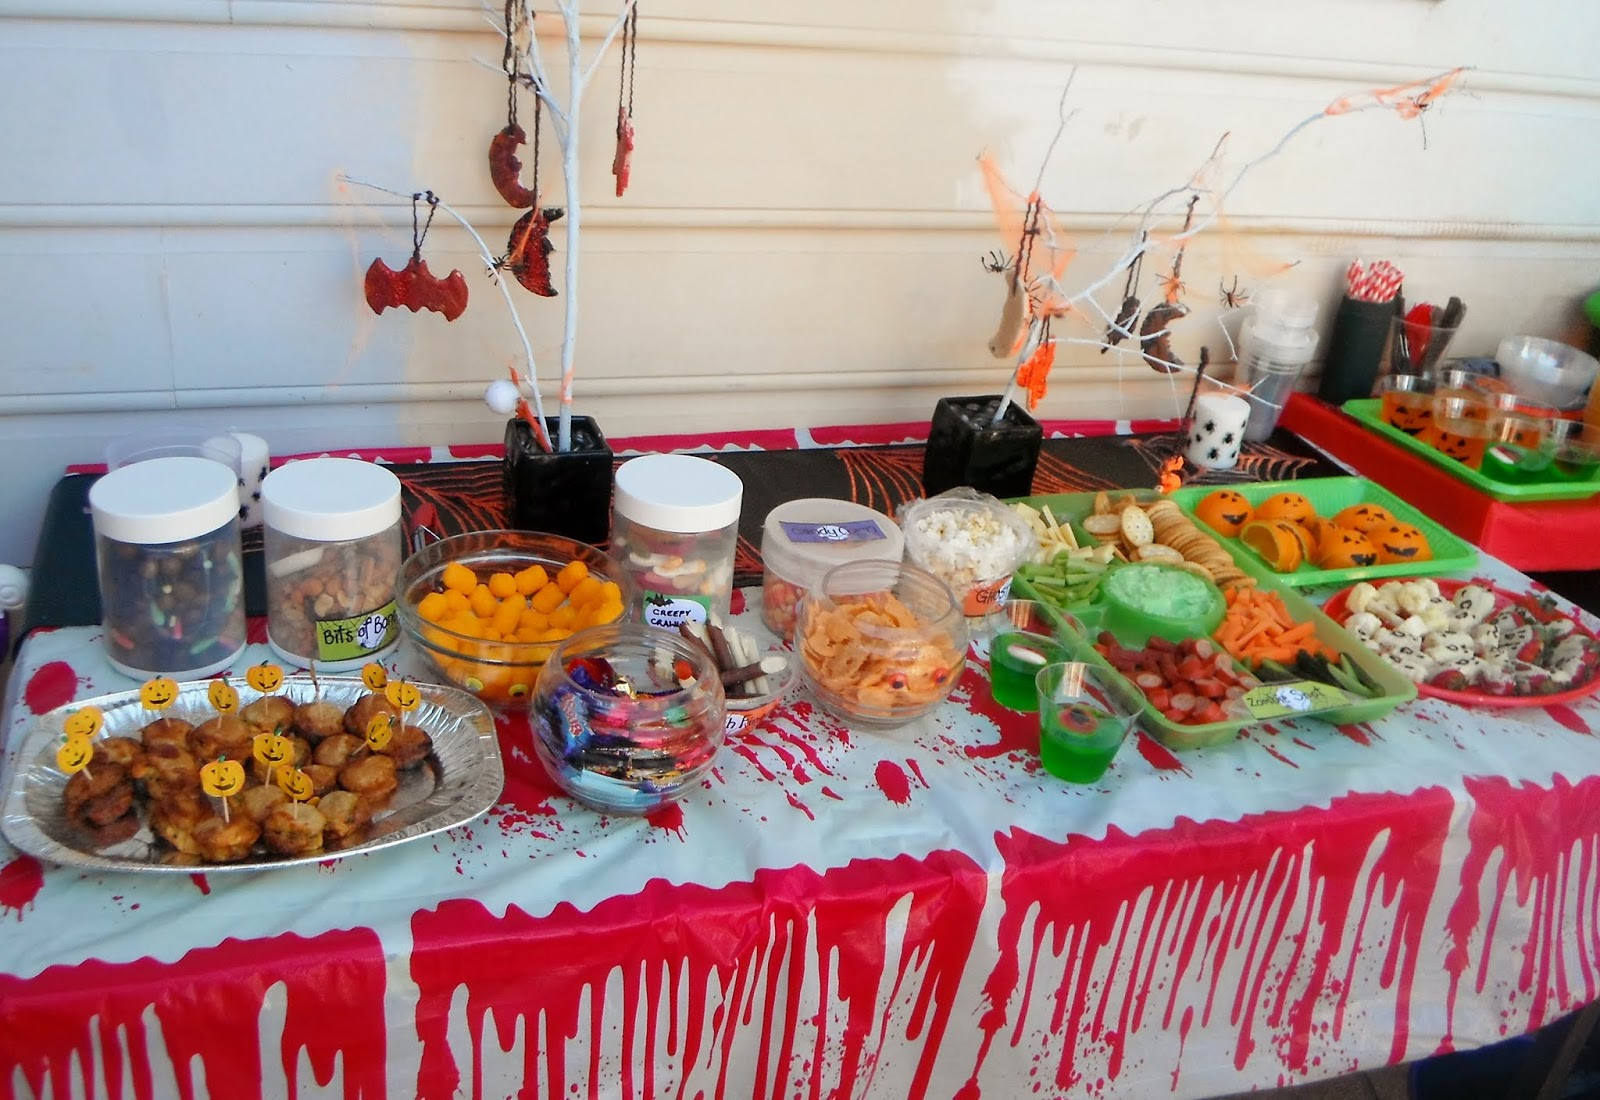 Halloween Food Party Ideas
 Adventures at home with Mum Halloween Party Food